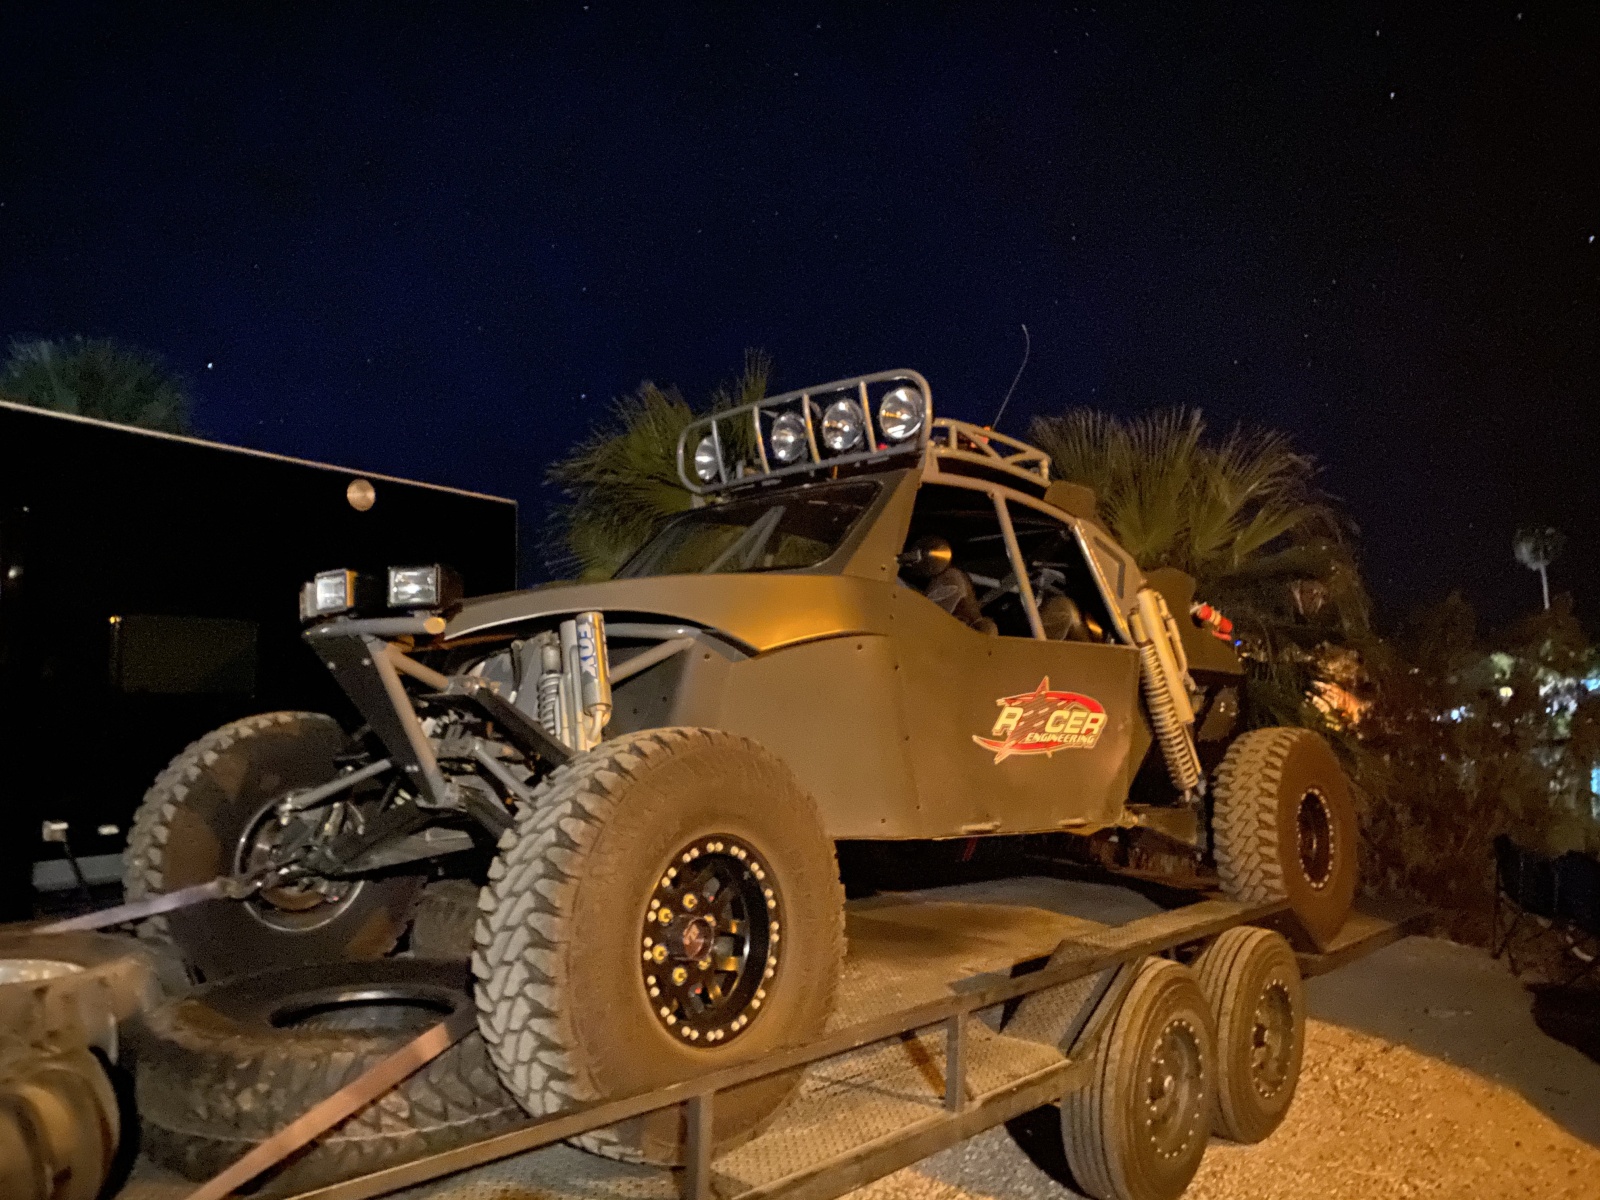 For Sale: Racer Engineering Prerunner (4 seat), Class 1 car - photo10